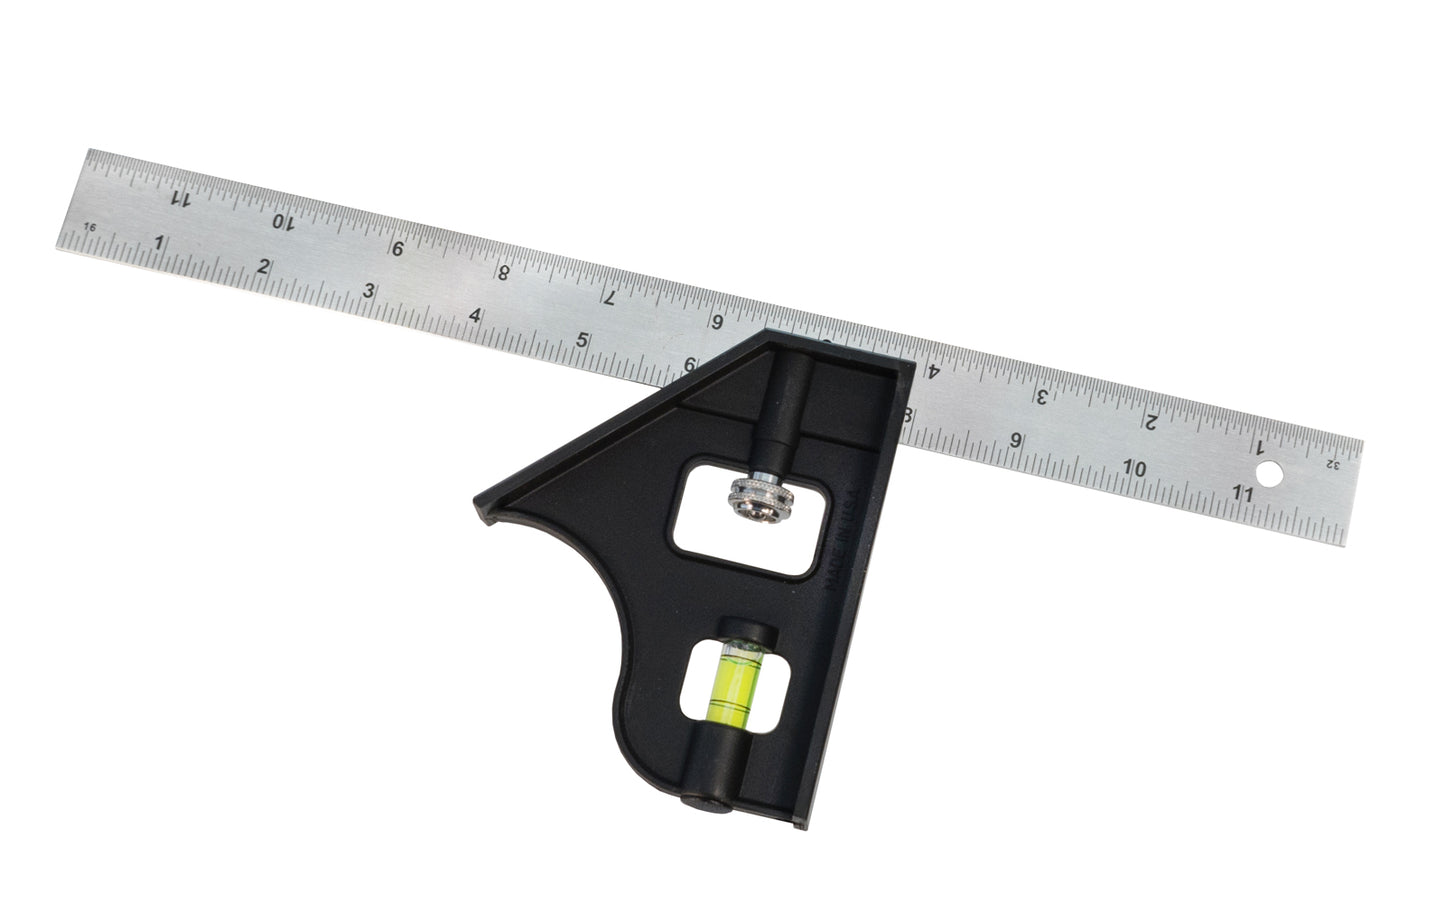 Model No. 11325 ~ Basic economy Mayes 12" combination square with a stainless steel rule. The blade is treated to resist rust & etched in 1/8" & 1/16" graduations. High impact plastic head.   Made in USA. 028452113253